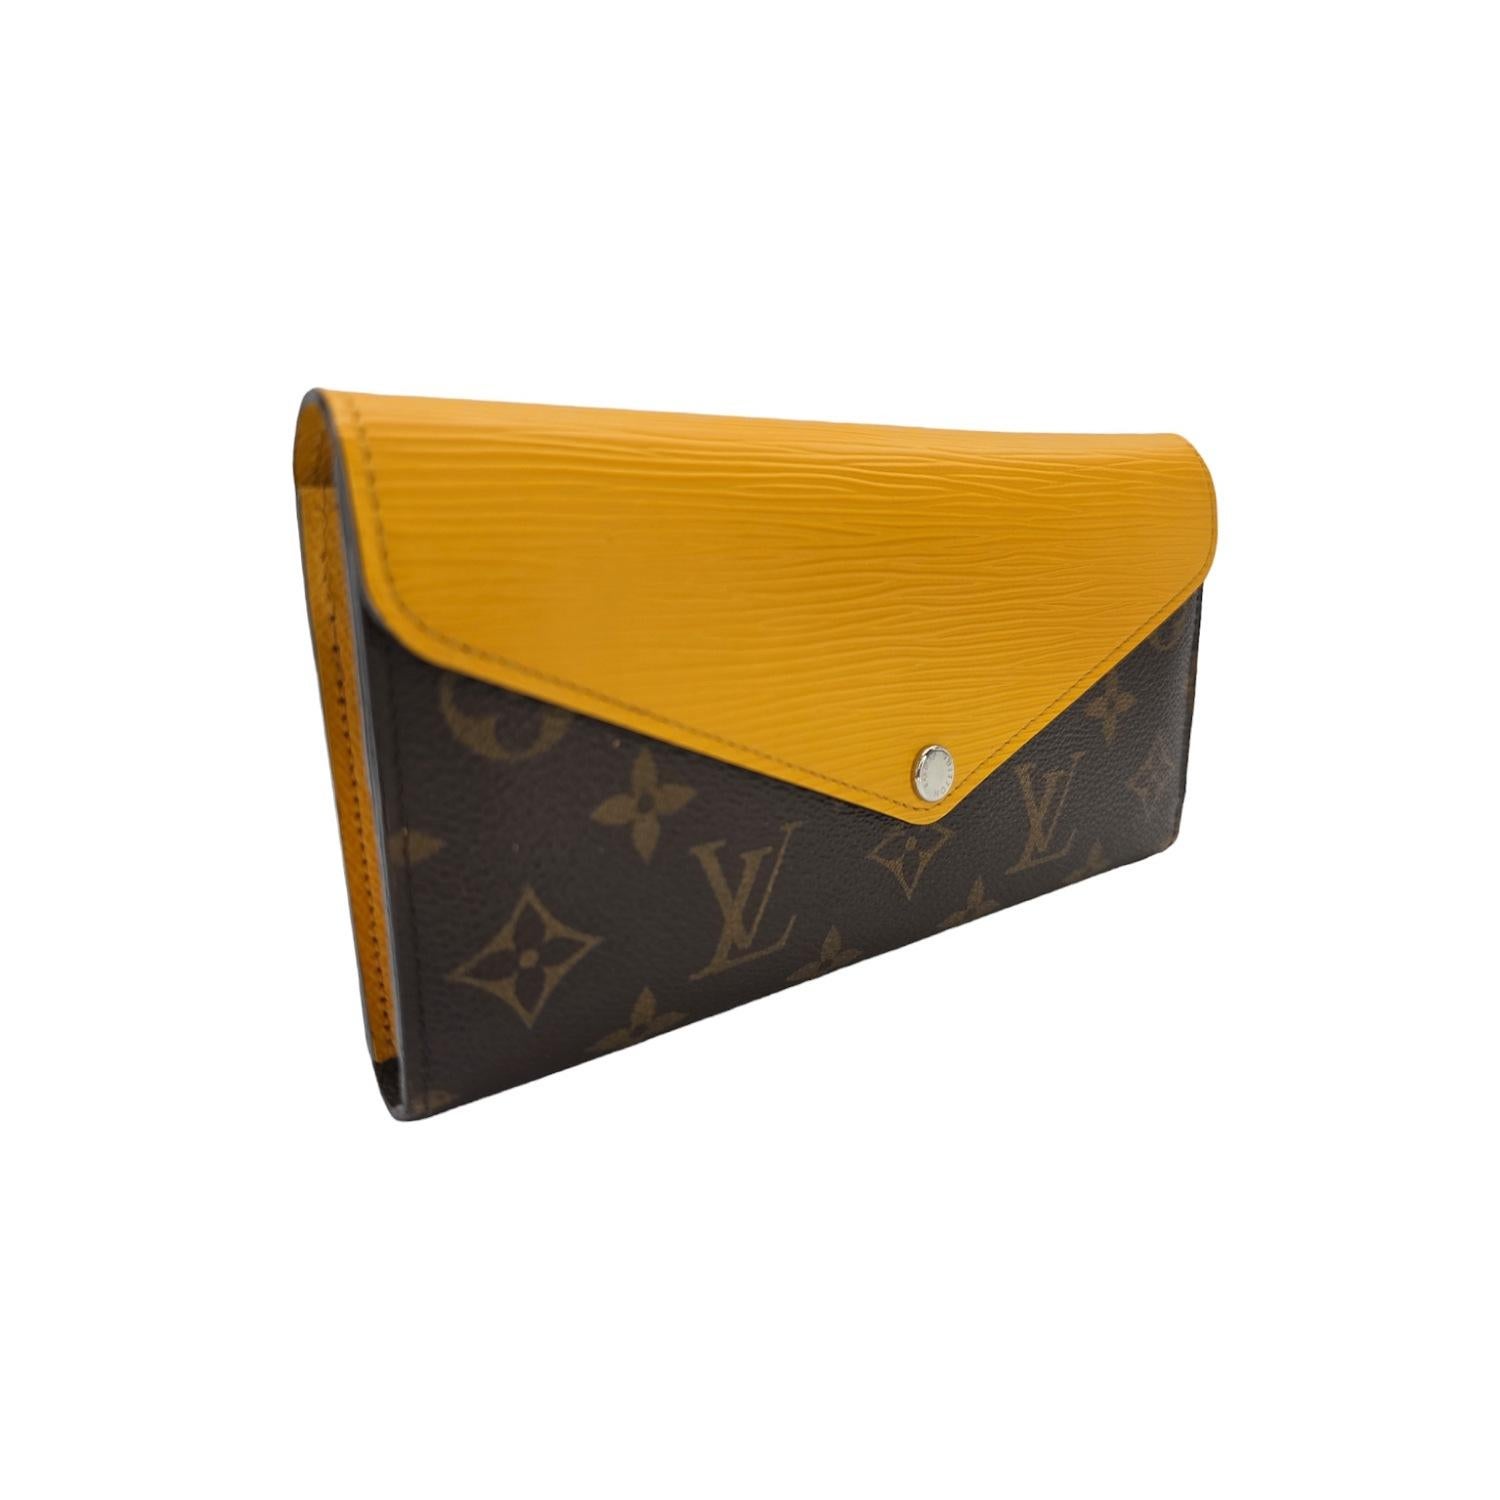 Indulge in luxury with the Louis Vuitton Monogram Epi Marie Lou Long Wallet. Featuring a timeless monogram coated canvas and a striking Epi leather flap in Mimosa Yellow, this wallet combines style and functionality. With multiple card slots,